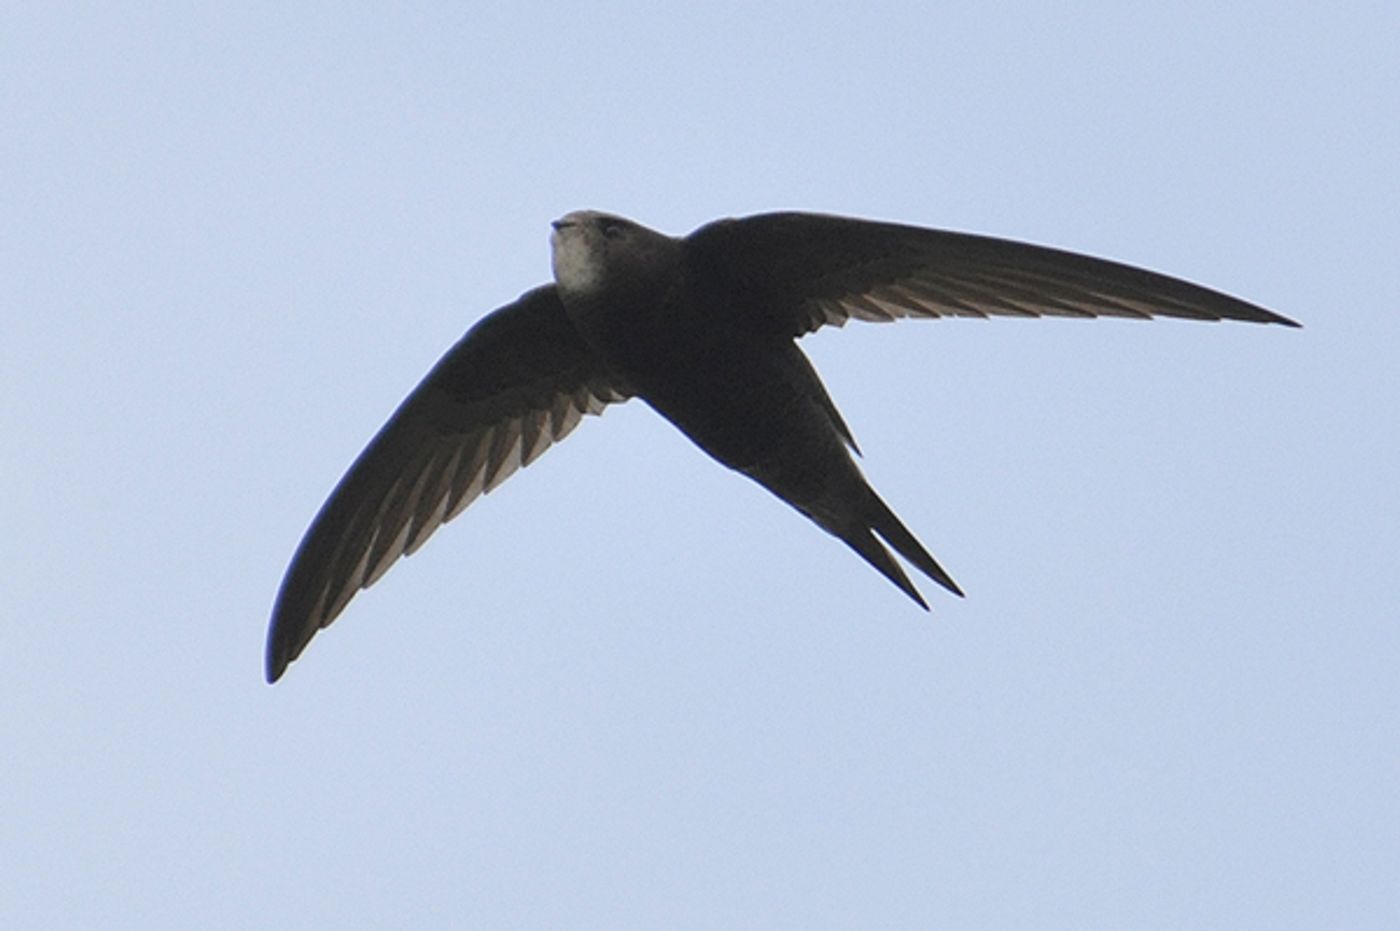 The common swift can stay airborne for 10 months, study finds.